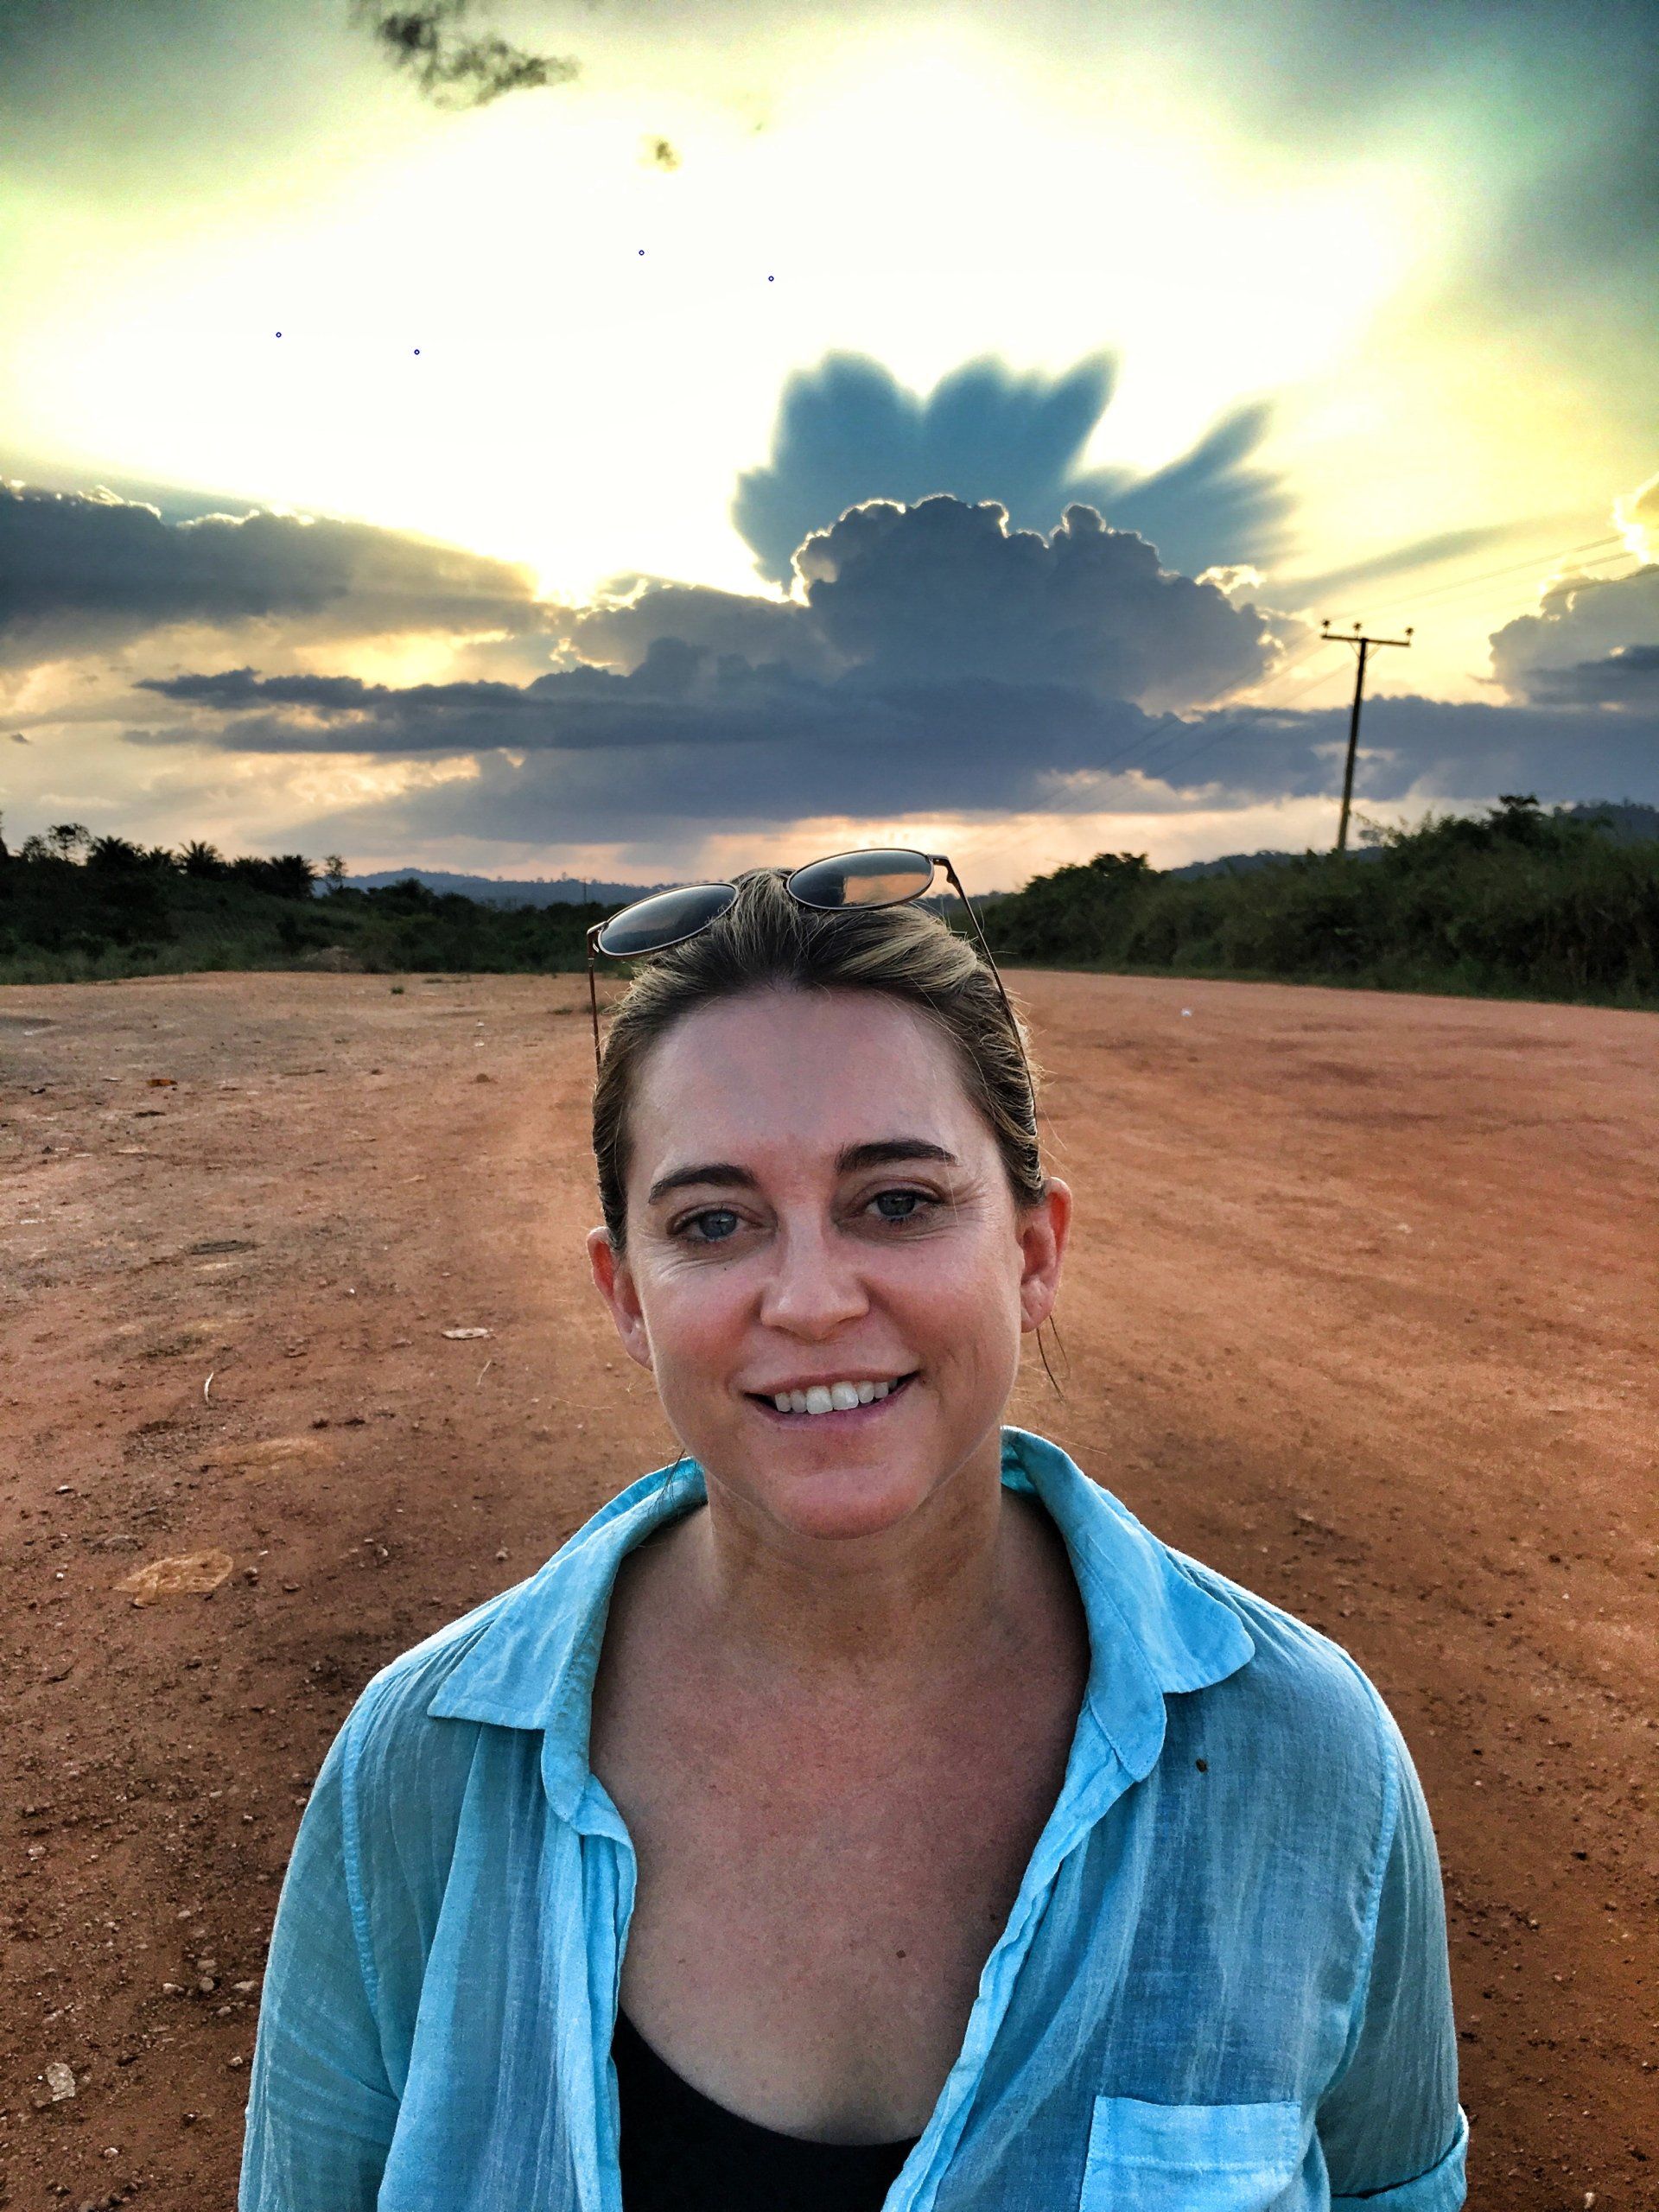 Blue Chip Foundation founder Jennifer Gross Visits Bonsasso, Ghana With VII Documentary Crew for Millennium Villages Project